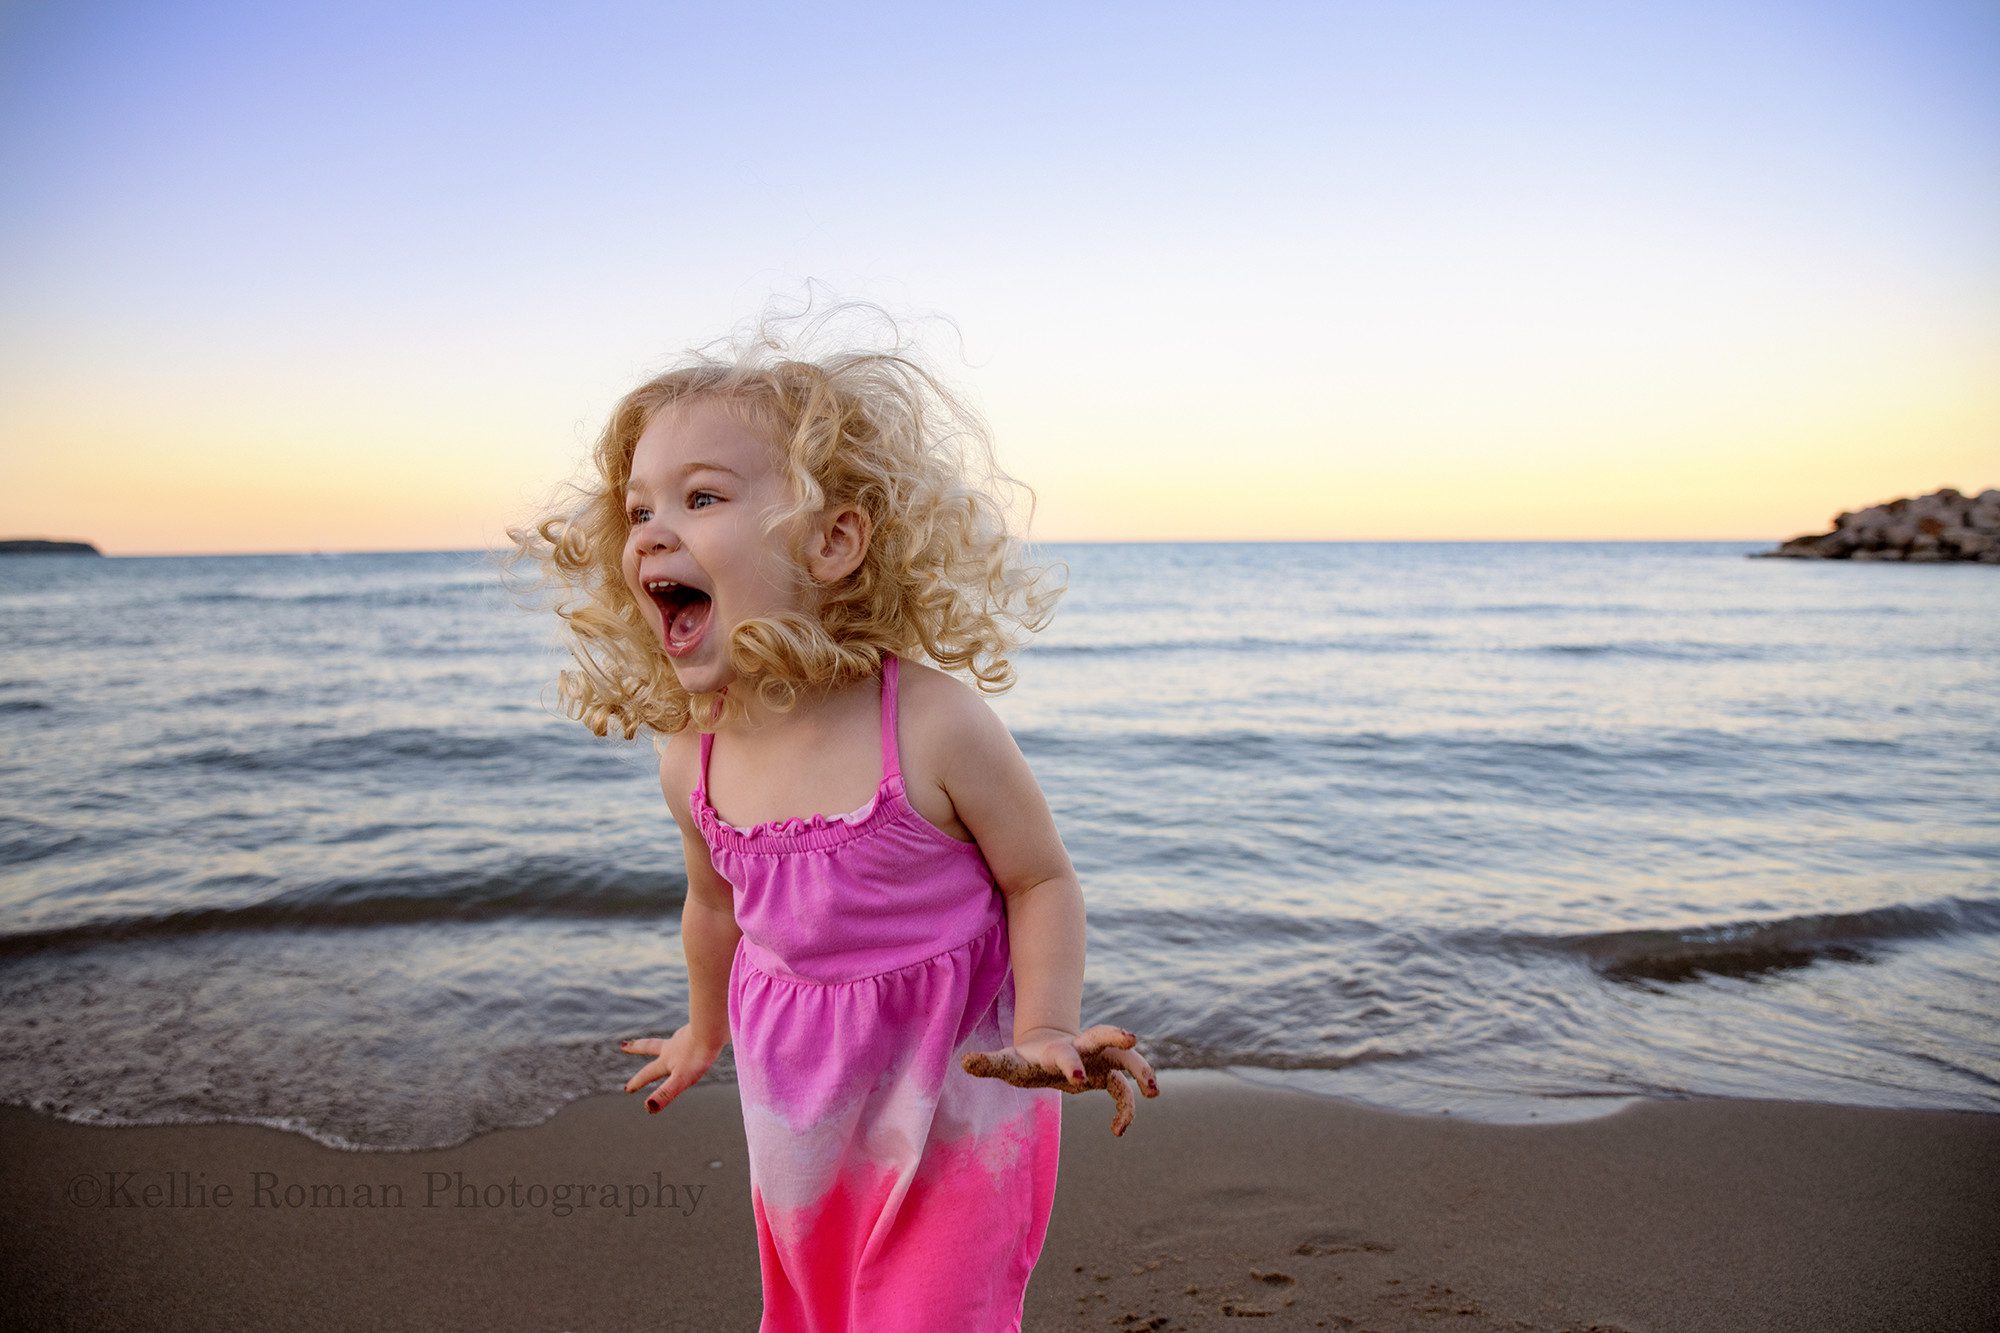 bubbles at the beach a three year old girl on a beach in milwaukee is jumping in excitement she has on a pink dress and has long curly blonde hair which is in front of her eyes the sky and lake water are shades of pastel with the sun setting